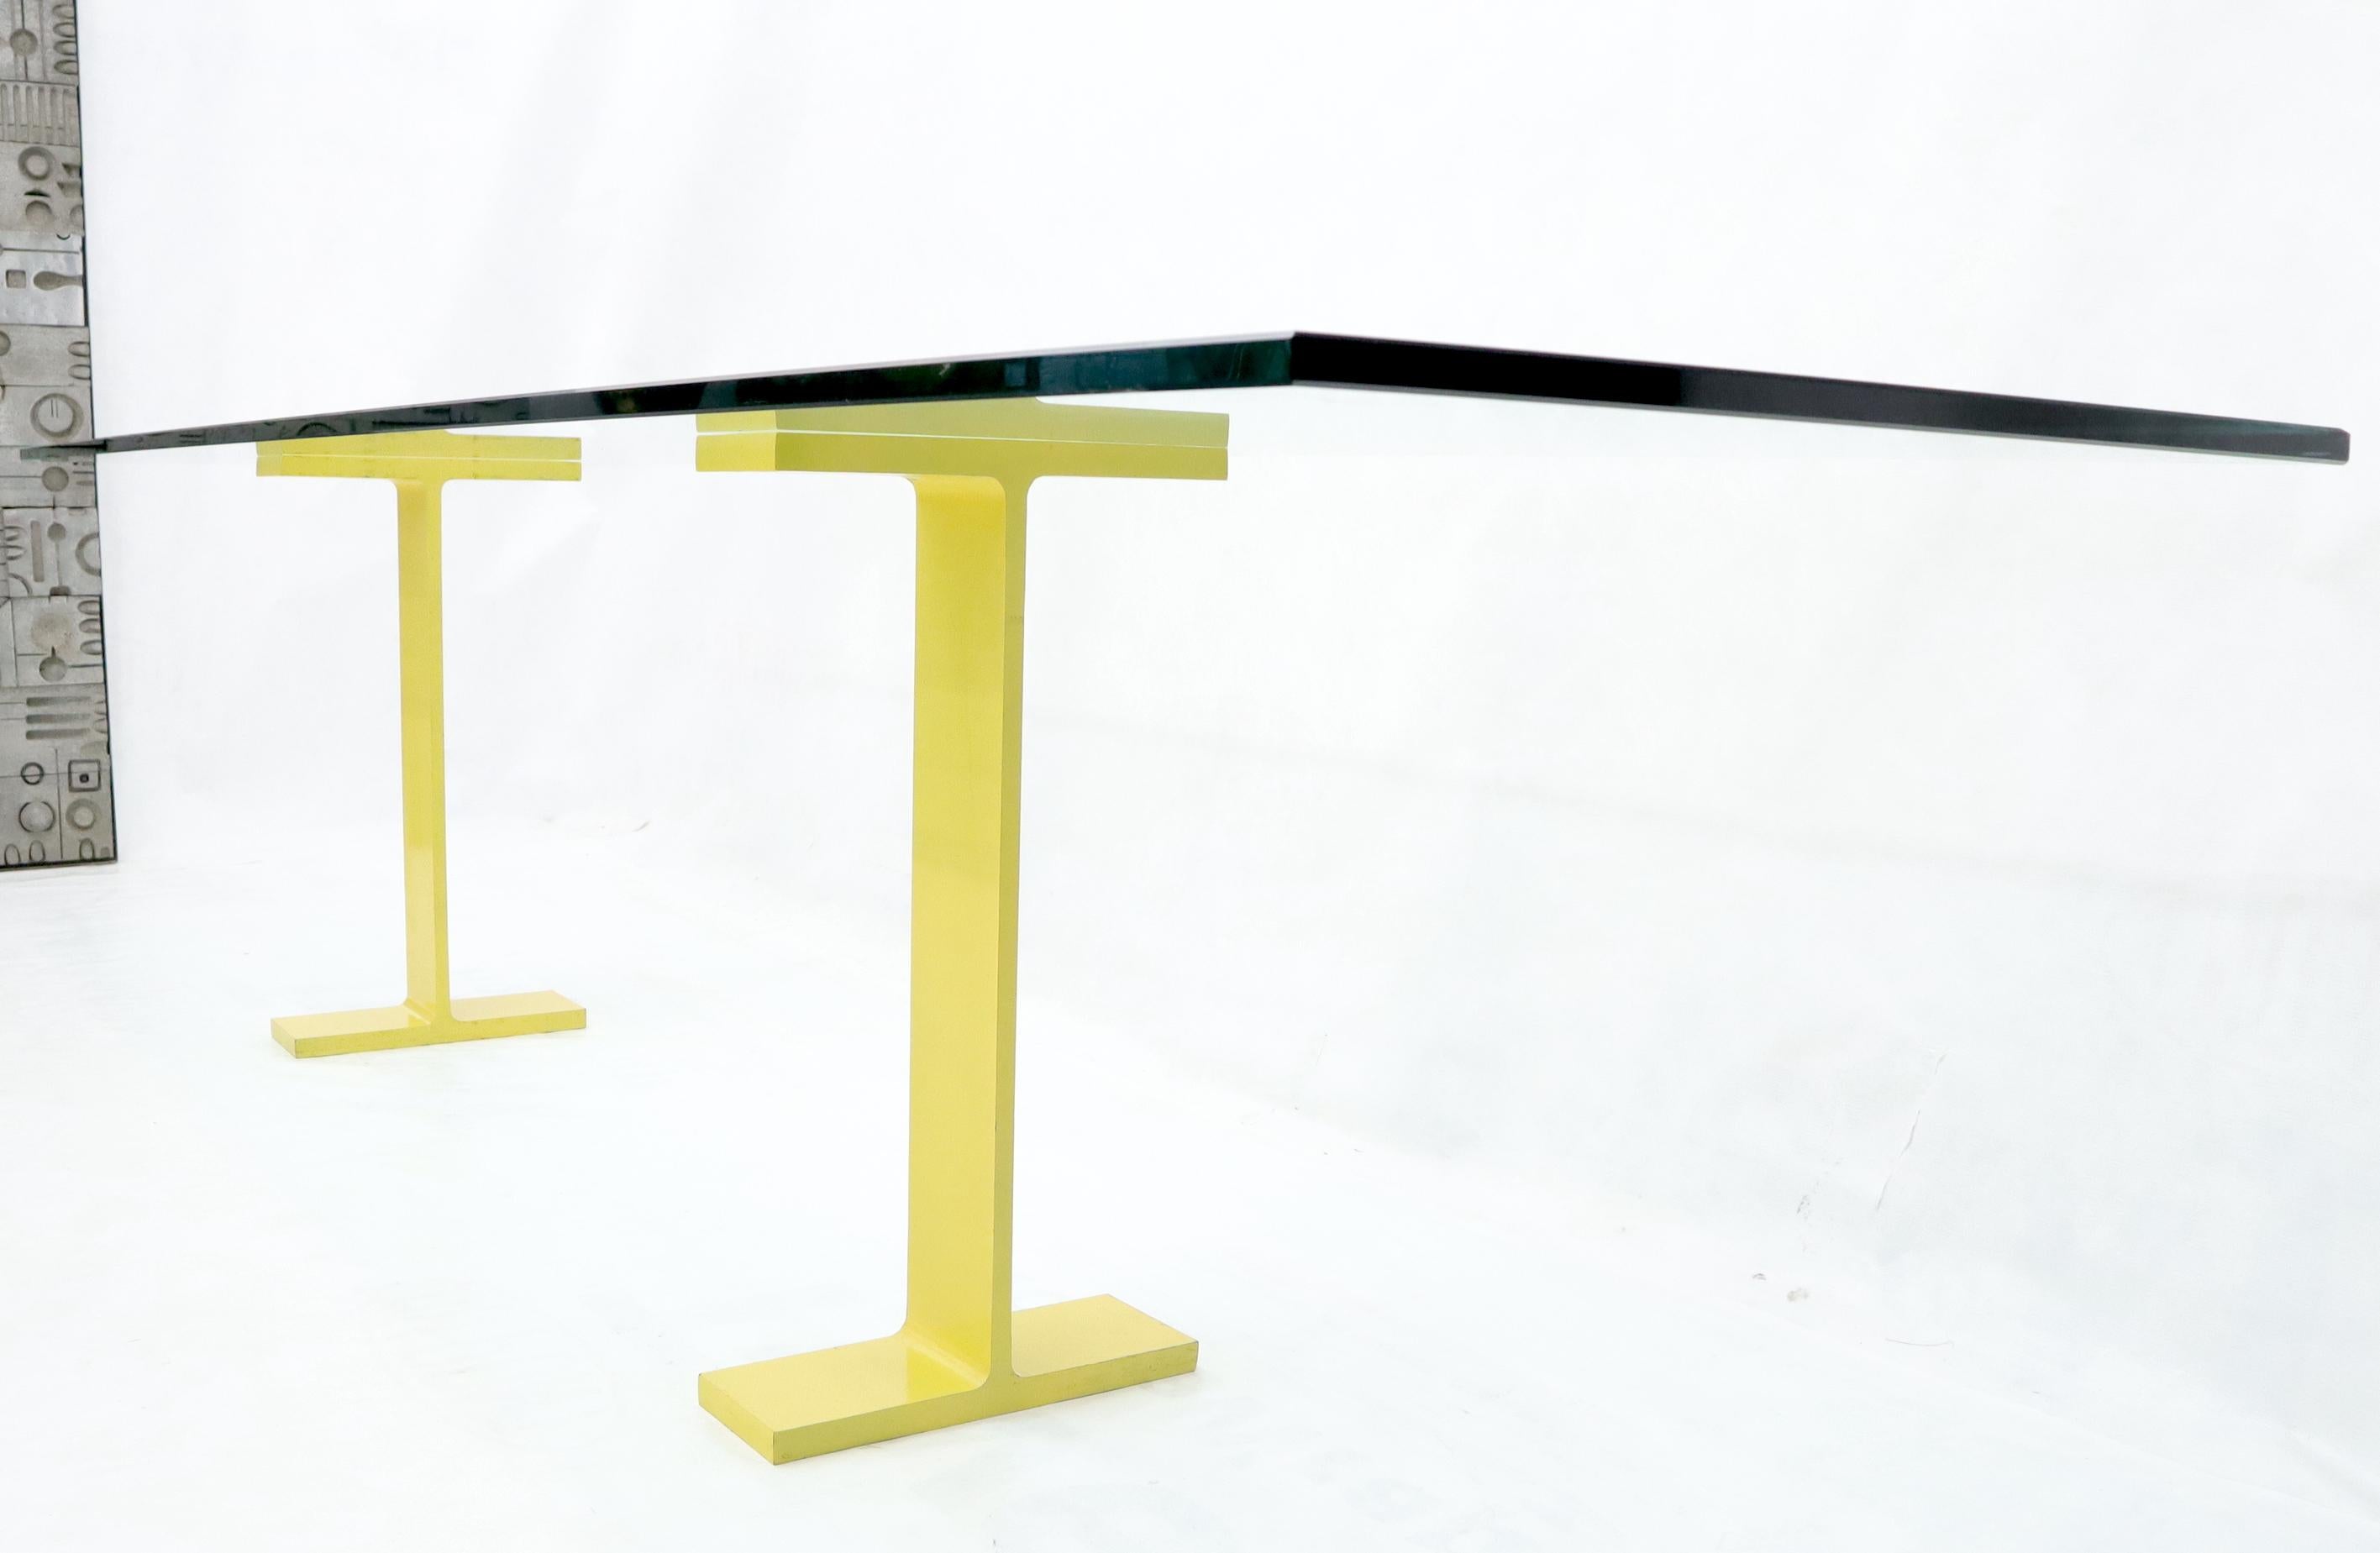 Steel Thick Glass Console Table Sitting on the I beam Base